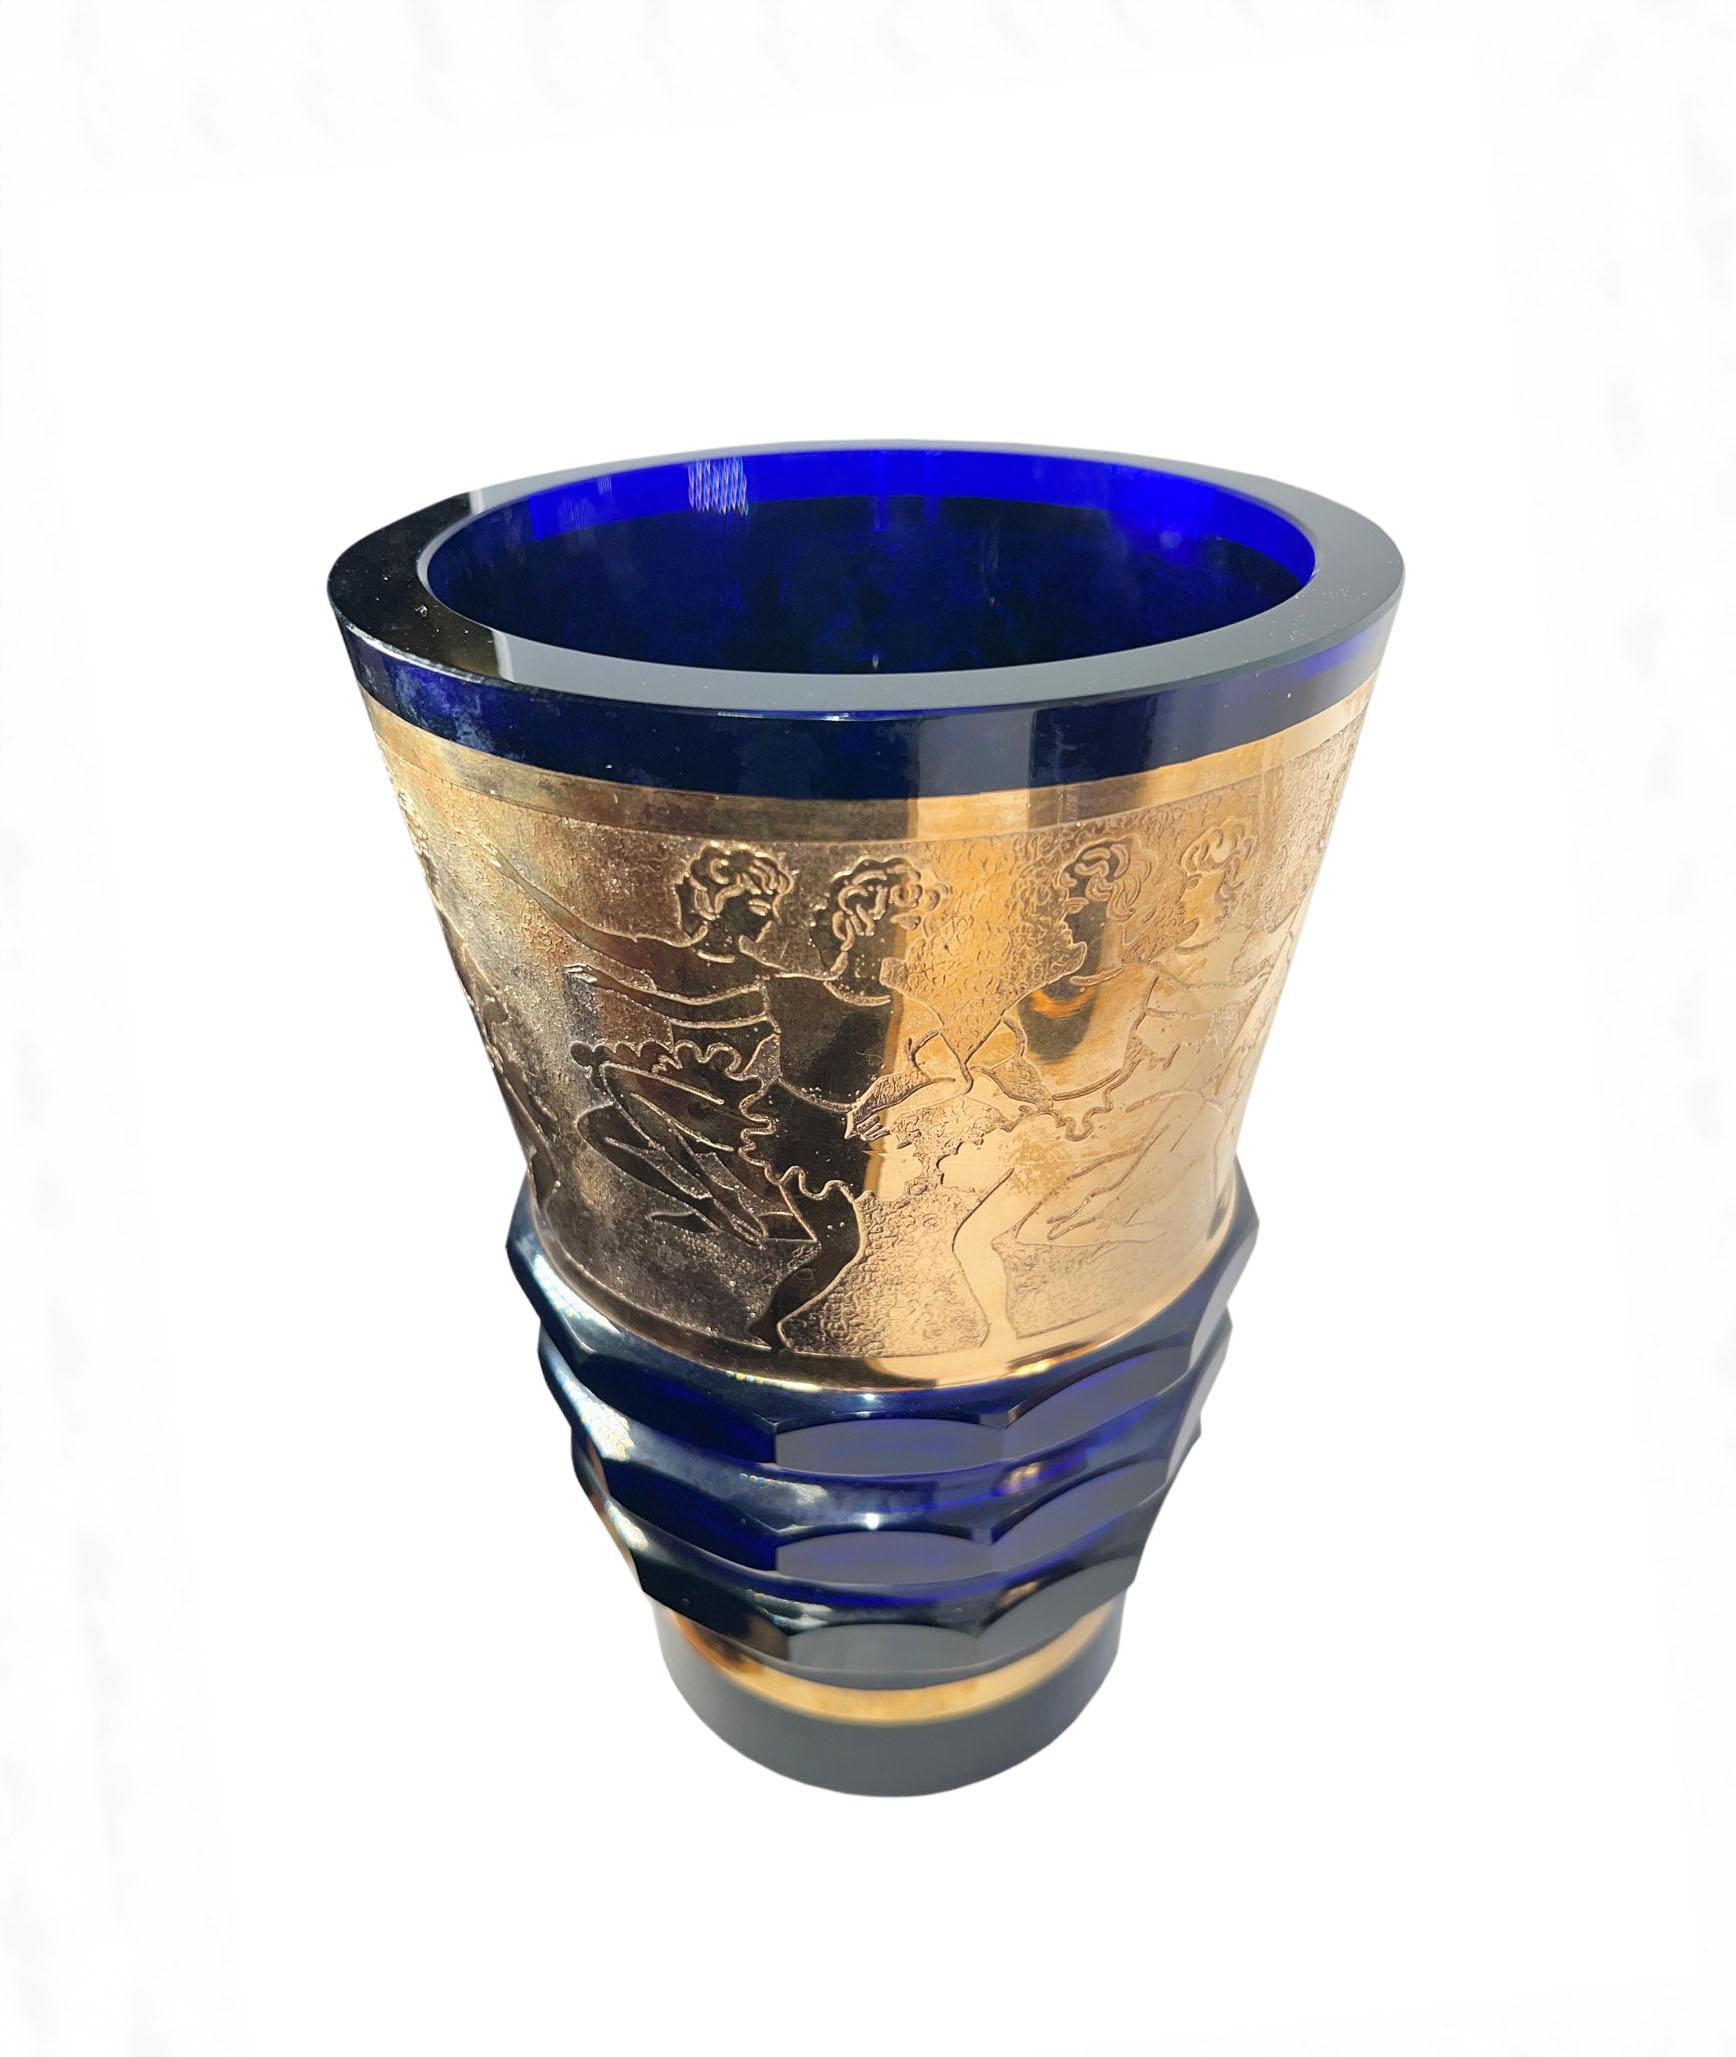 A pair of mid 20th century Czech cobalt blue vases with adults, dancing and Holding hands in a continuous circle in gold gilding around the rim. 